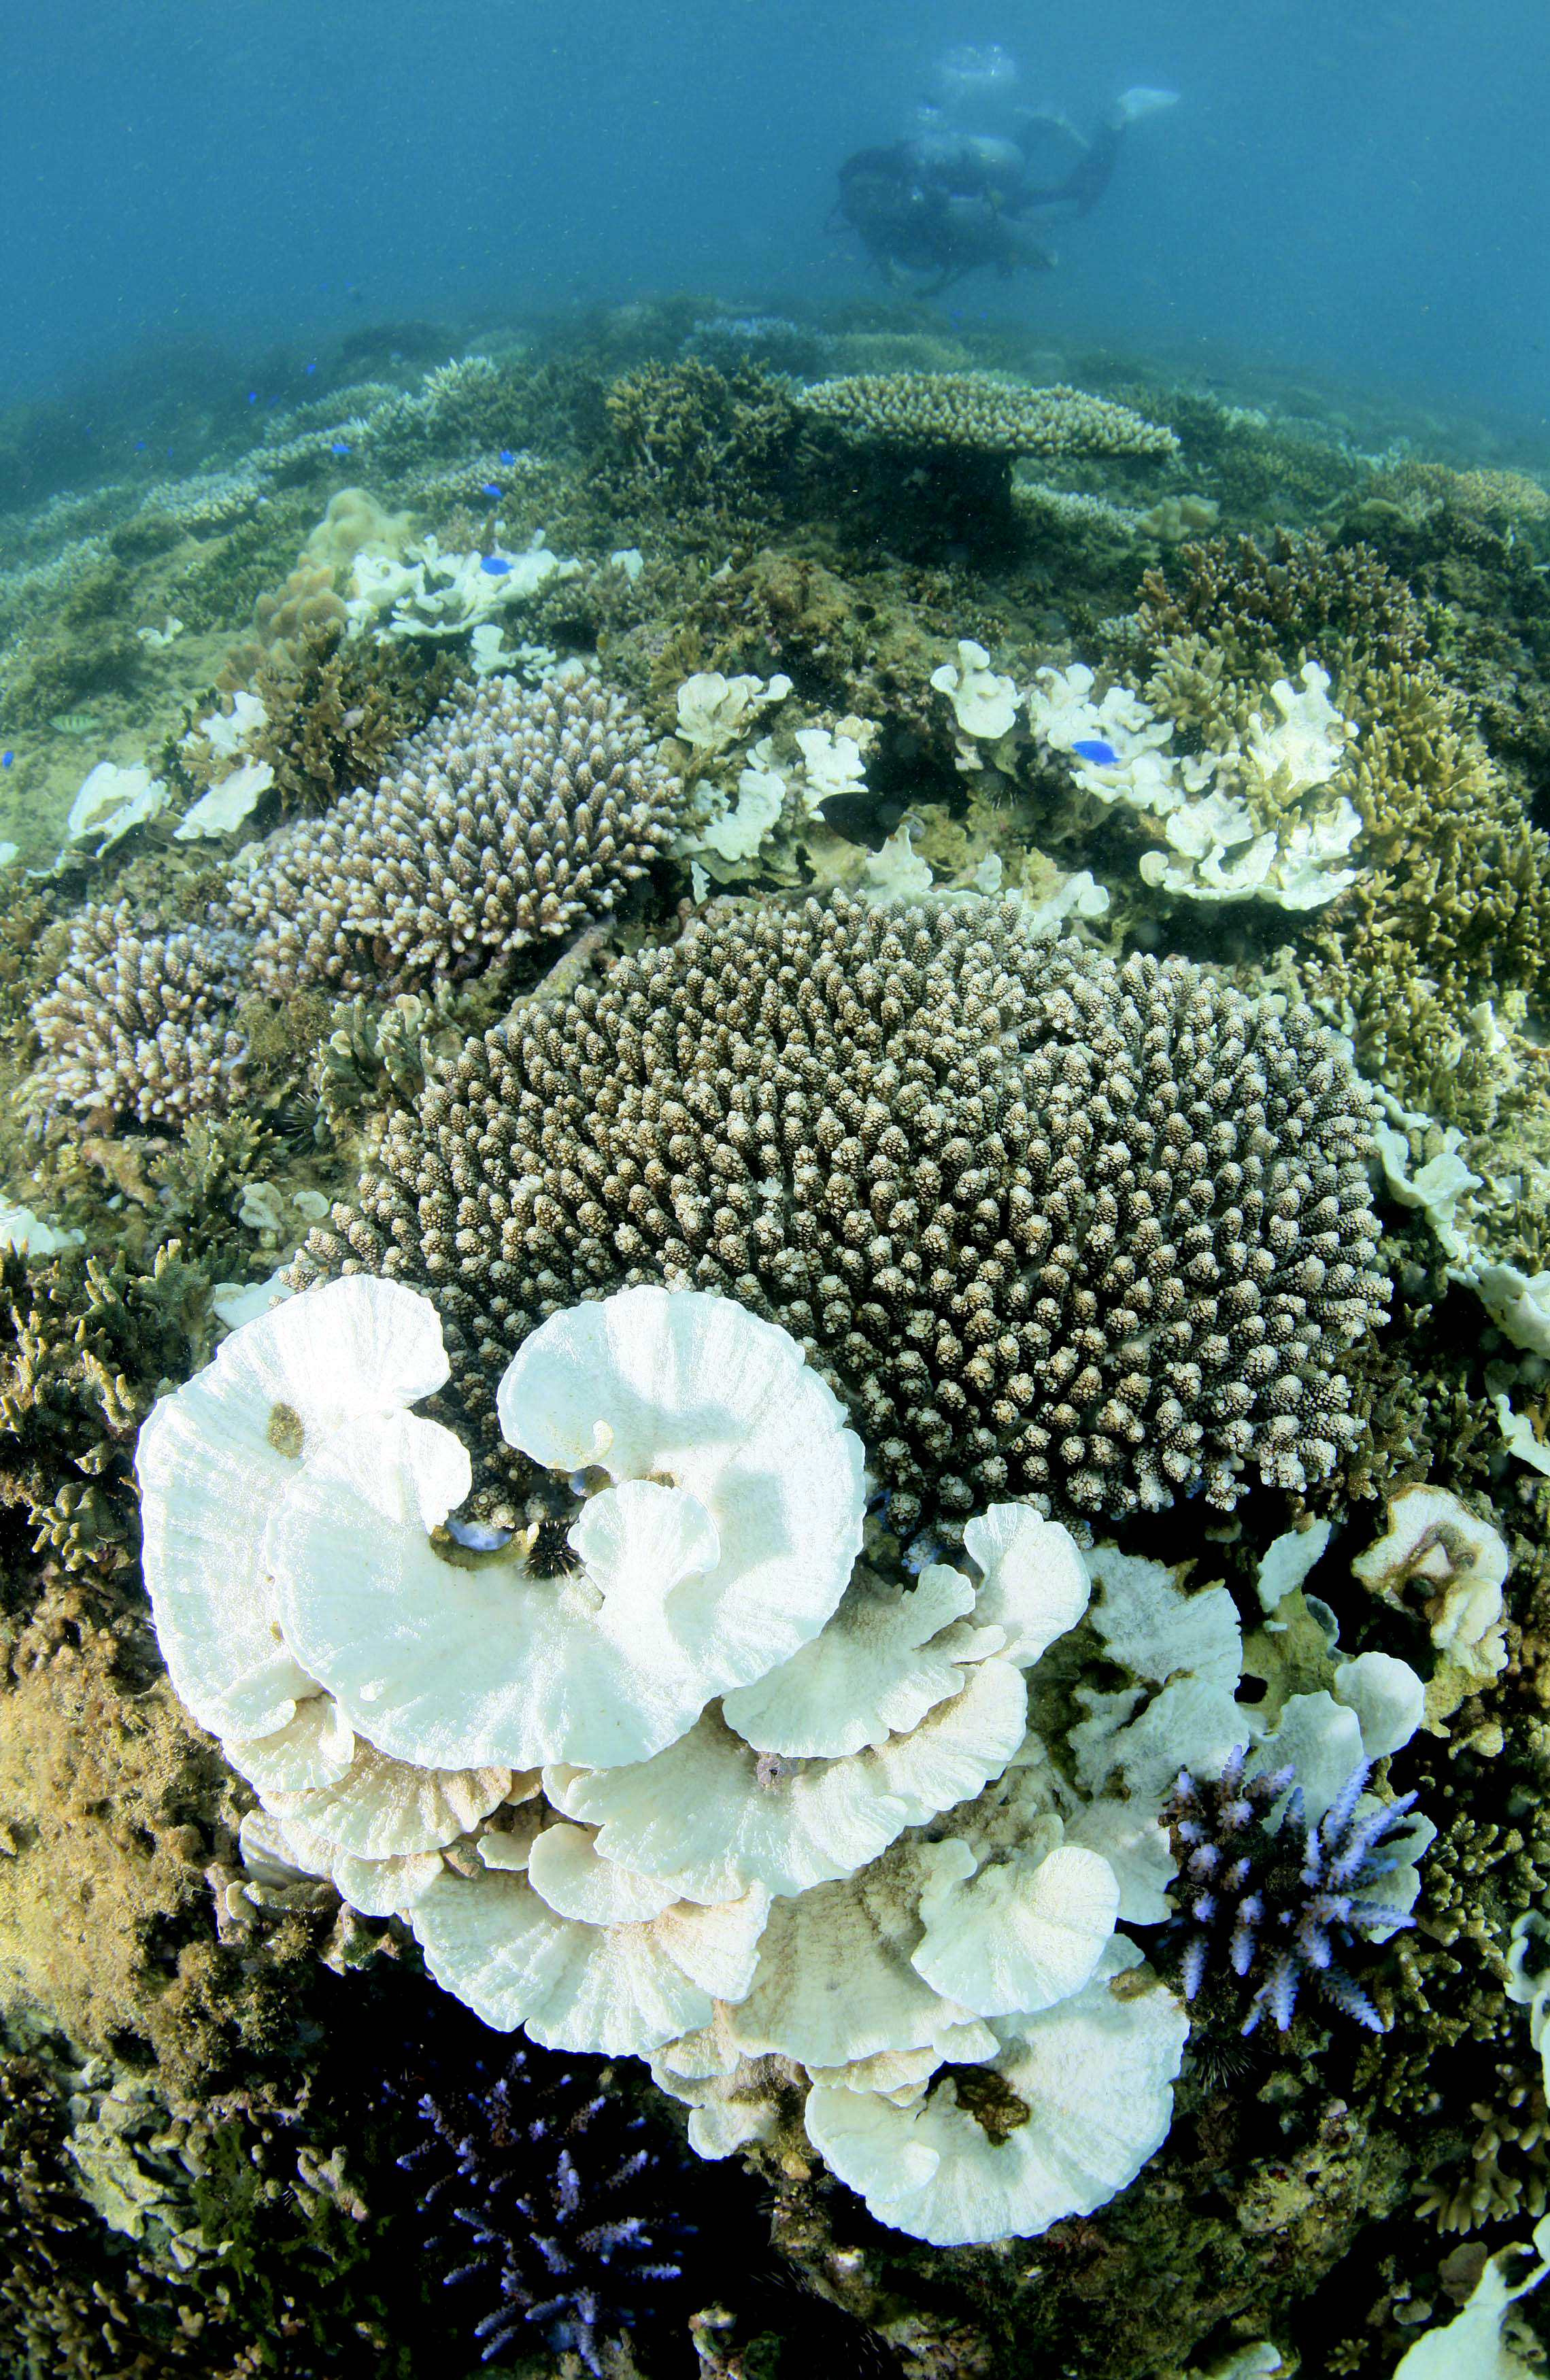 Corals are bleached on a seabed near Okinawa island on Aug. 26, 2013. (The Yomiuri Shimbun—AP)